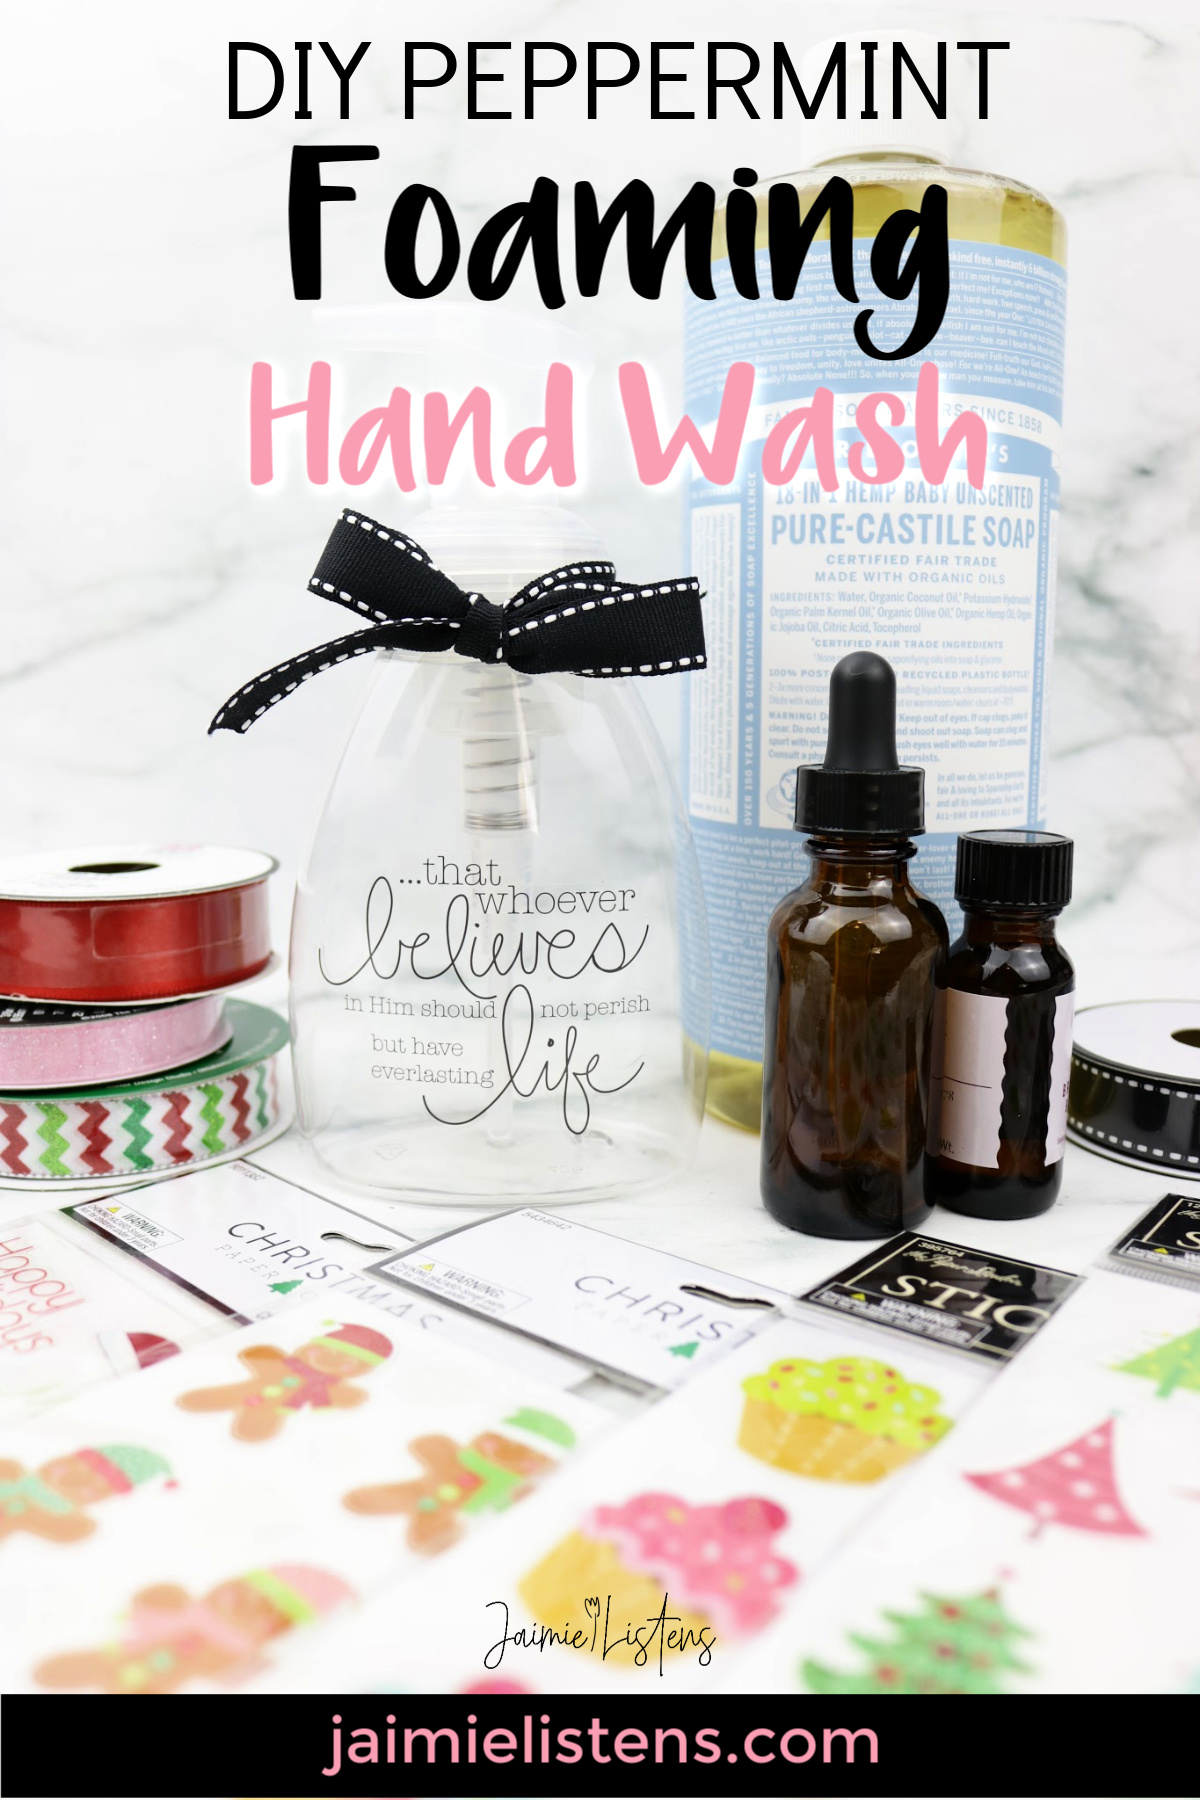 DIY Peppermint Foaming Hand Wash - Jaimie Listens: DIY Peppermint Foaming Hand Wash - Jaimie Listens: Easy, fun and inexpensive giftable craft. Recipe and instructions!